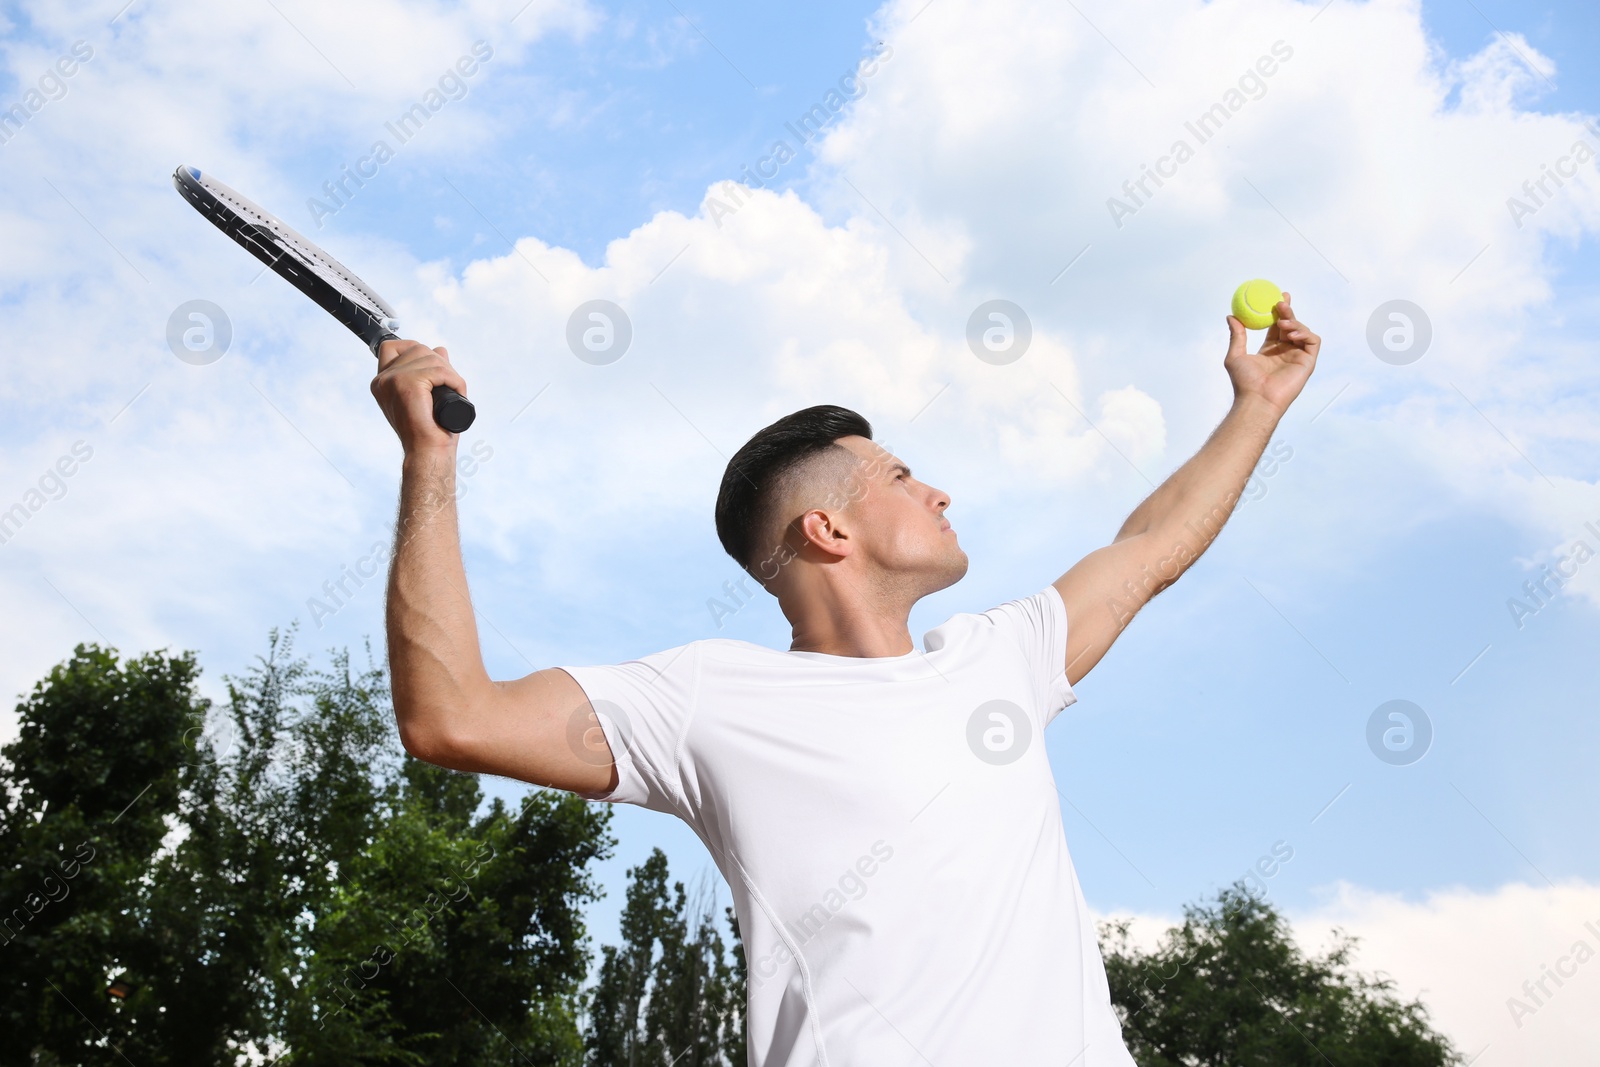 Photo of Man serving ball while playing tennis outdoors